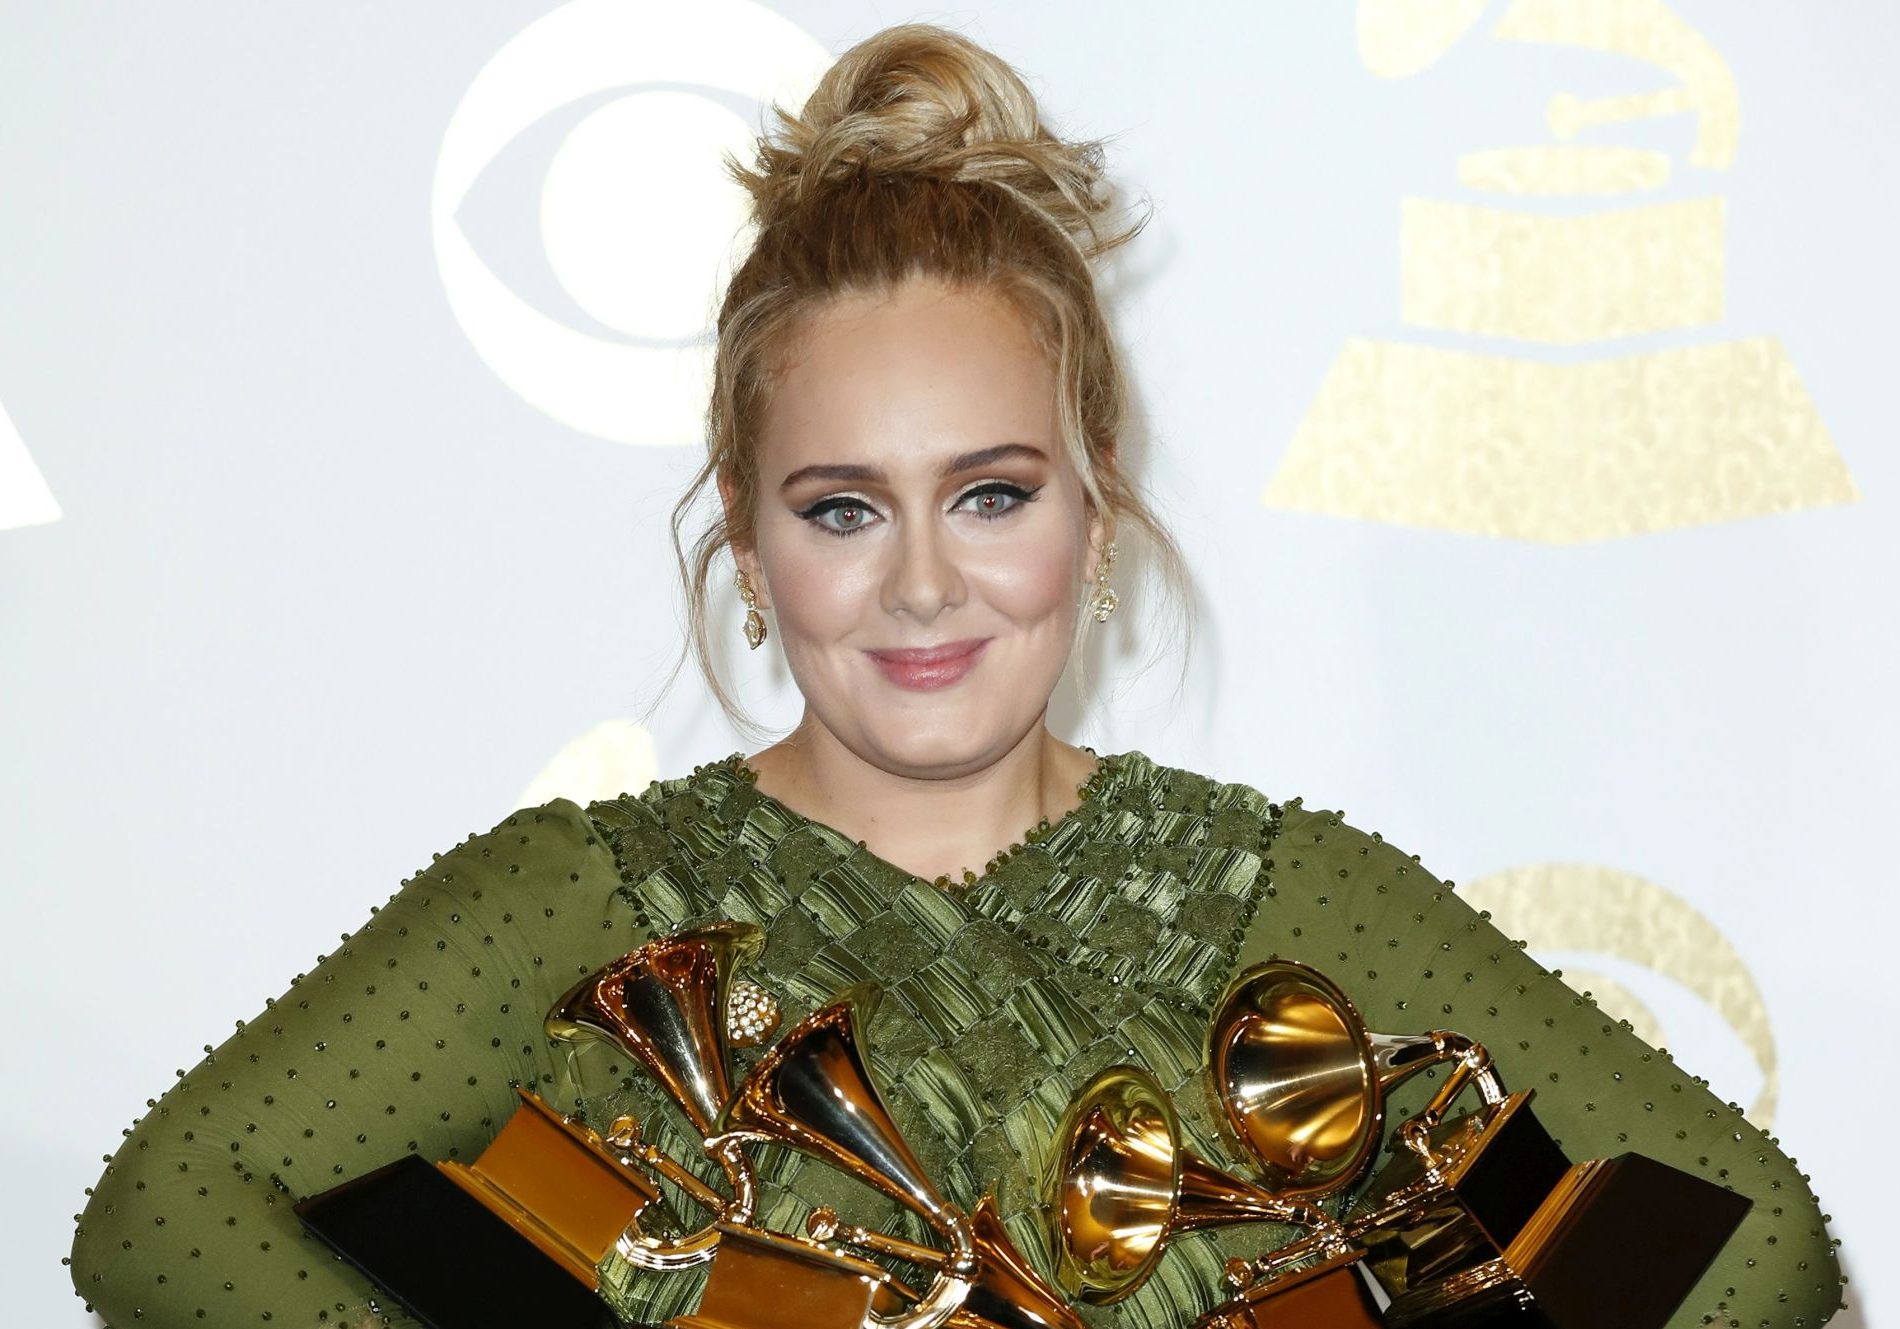 epa05790152 Adele holds up her awards in the press room during the 59th annual Grammy Awards ceremony at the Staples Center in Los Angeles, California, USA, 12 February 2017. Adele won the awards Record Of The Year, Album Of The Year, Song Of The Year, Best Pop Solo Performance and Best Pop Vocal Album, with the album '25' and song 'Hello.'  EPA/MIKE NELSON